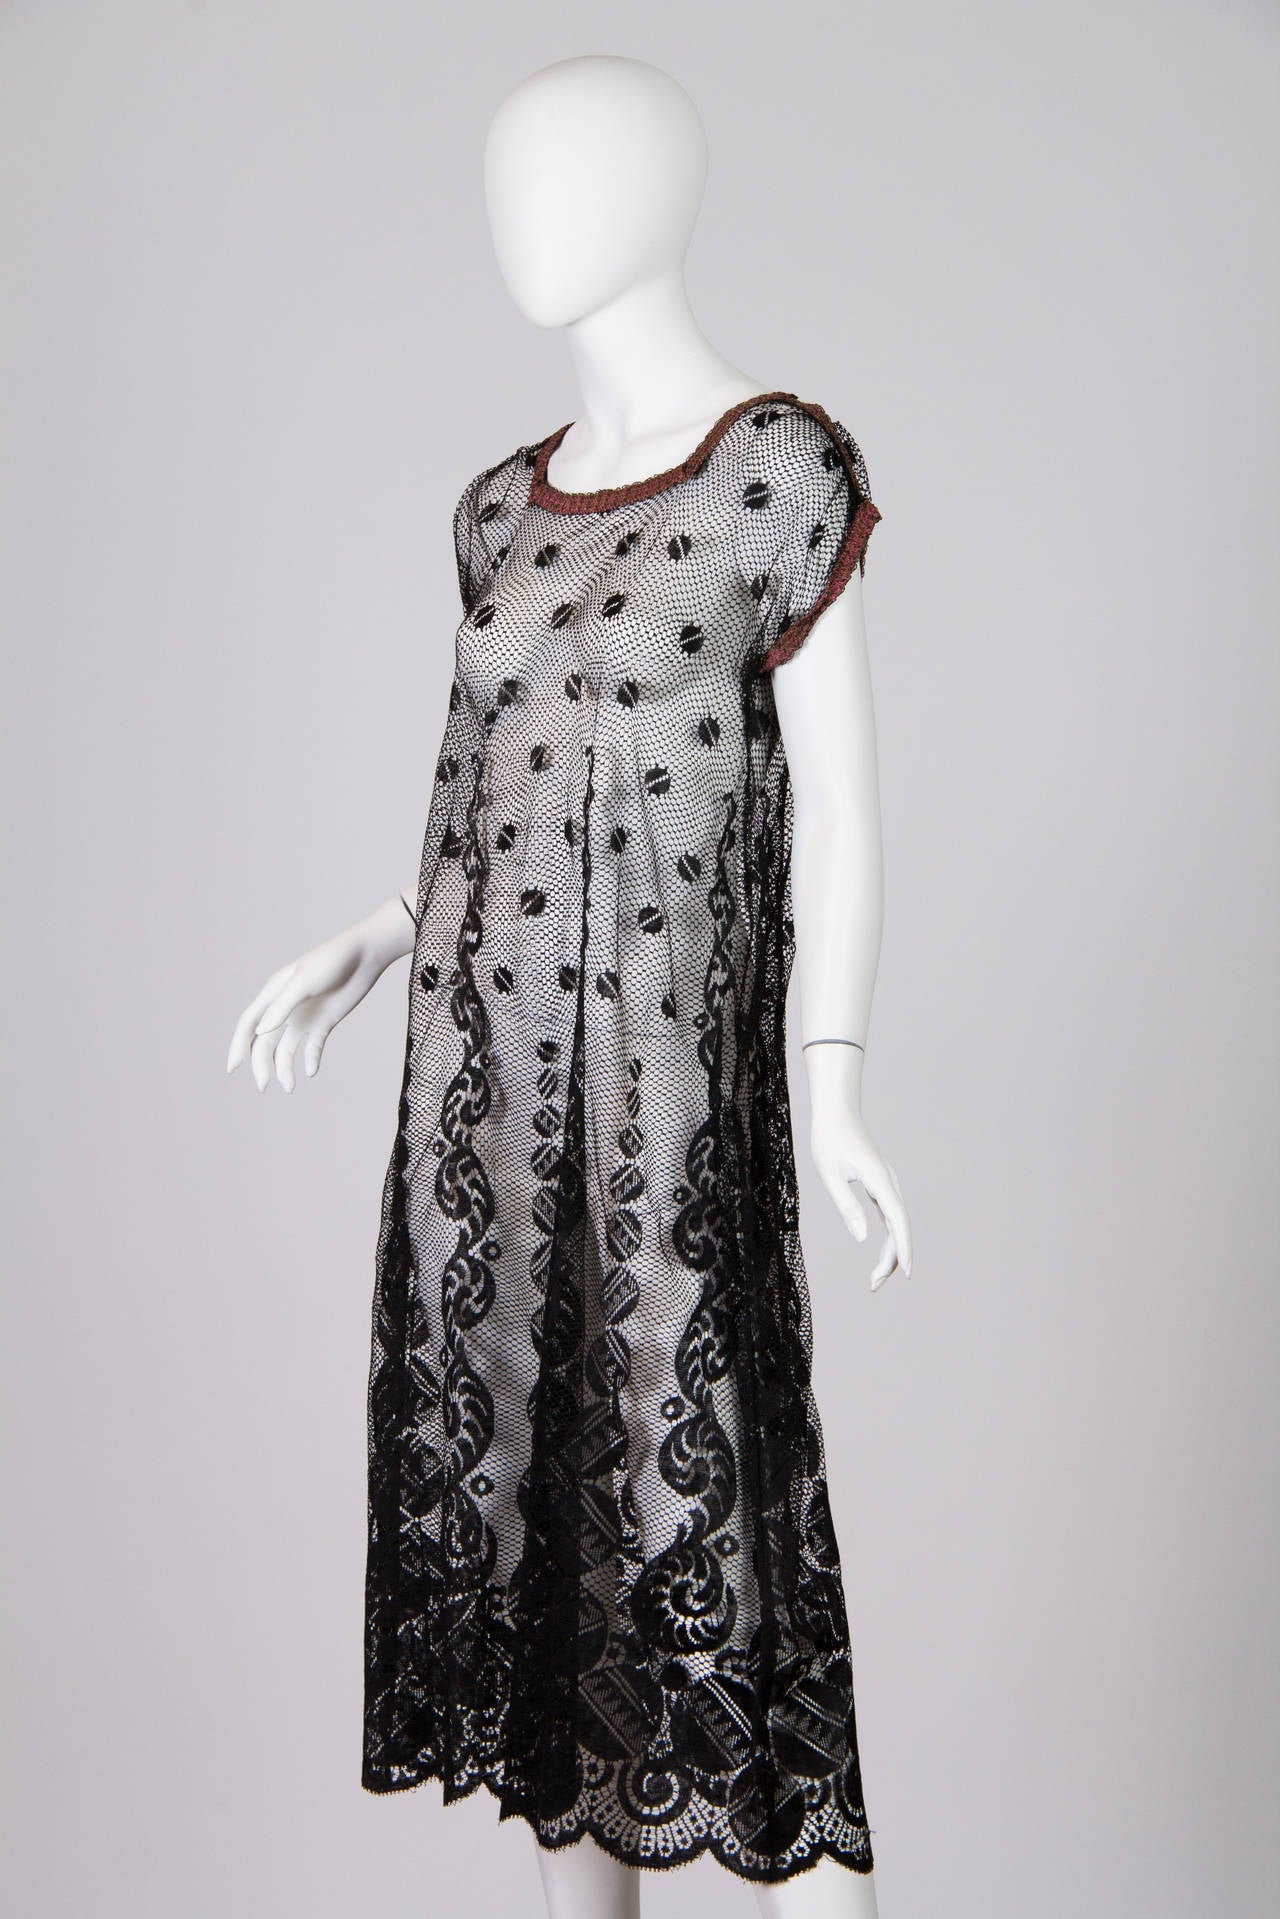 1920s Art Deco Silk Lace Dress For Sale at 1stdibs